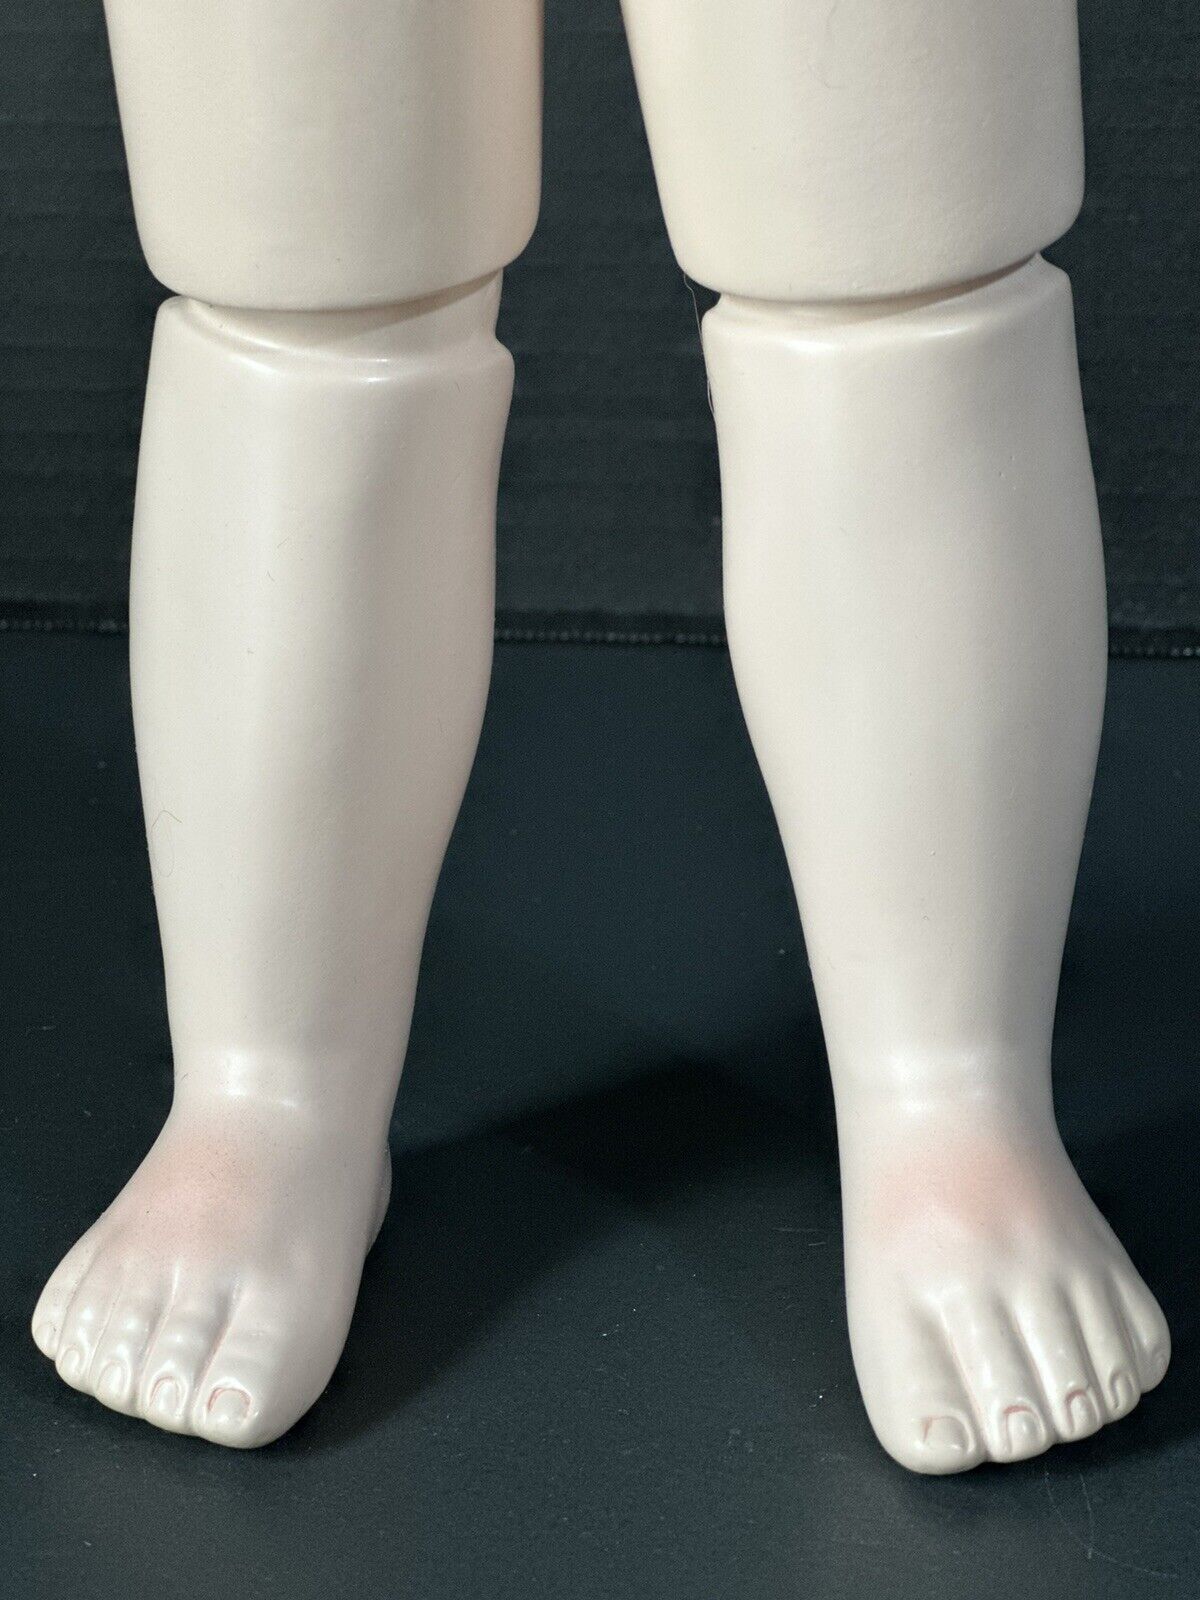 Collectible Artist Reproduction Of Bru Jne 19” Doll Porcelain Head Seeley Body